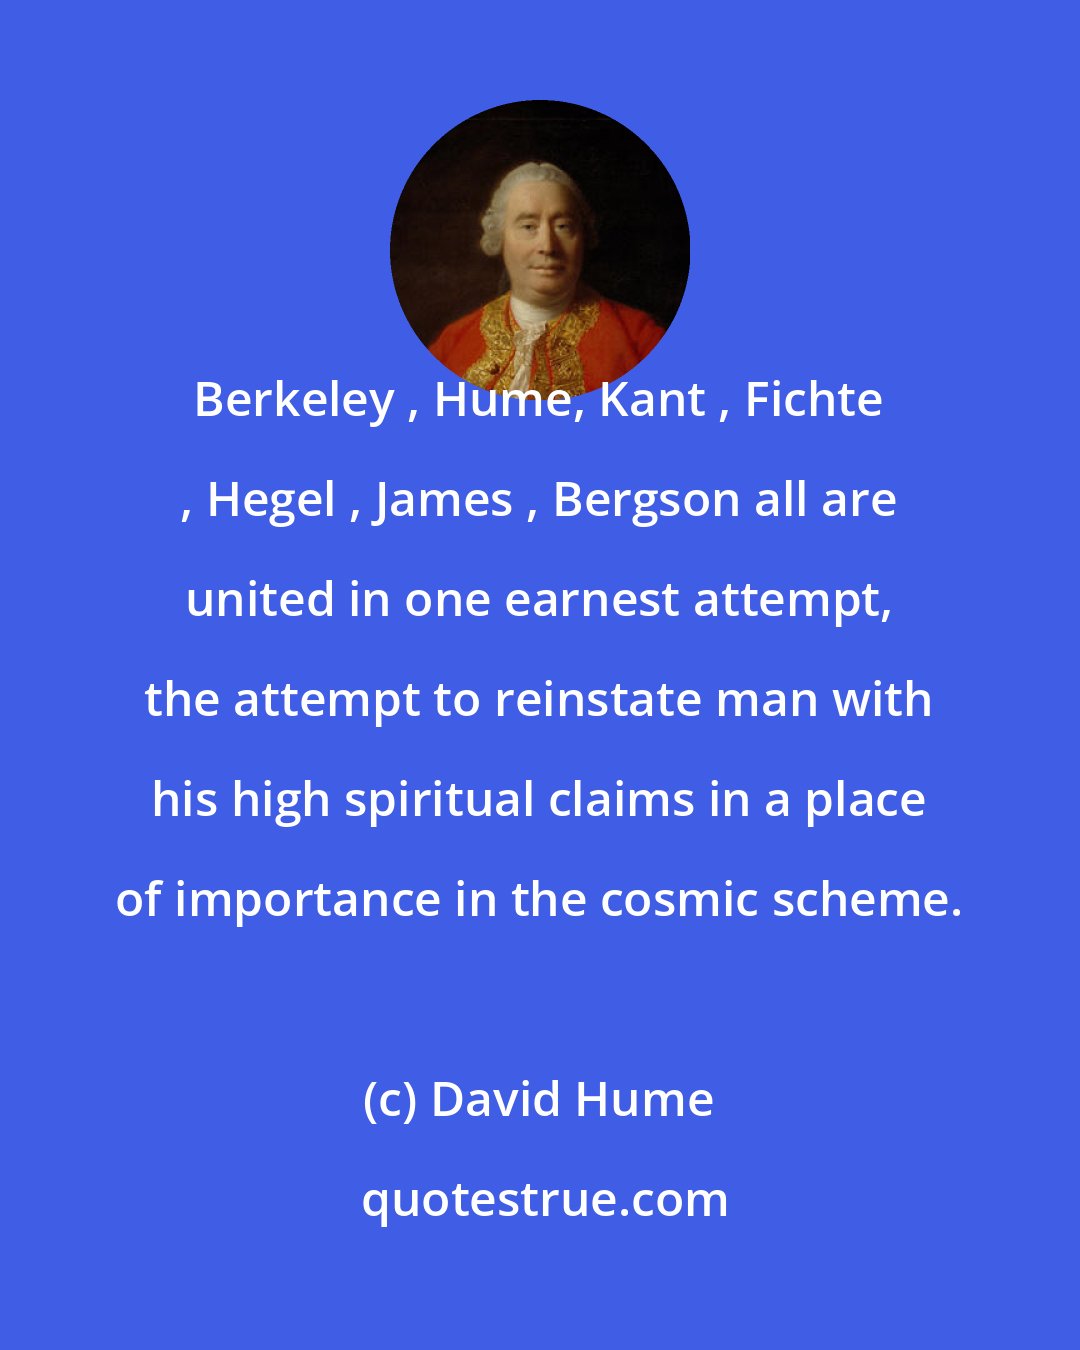 David Hume: Berkeley , Hume, Kant , Fichte , Hegel , James , Bergson all are united in one earnest attempt, the attempt to reinstate man with his high spiritual claims in a place of importance in the cosmic scheme.